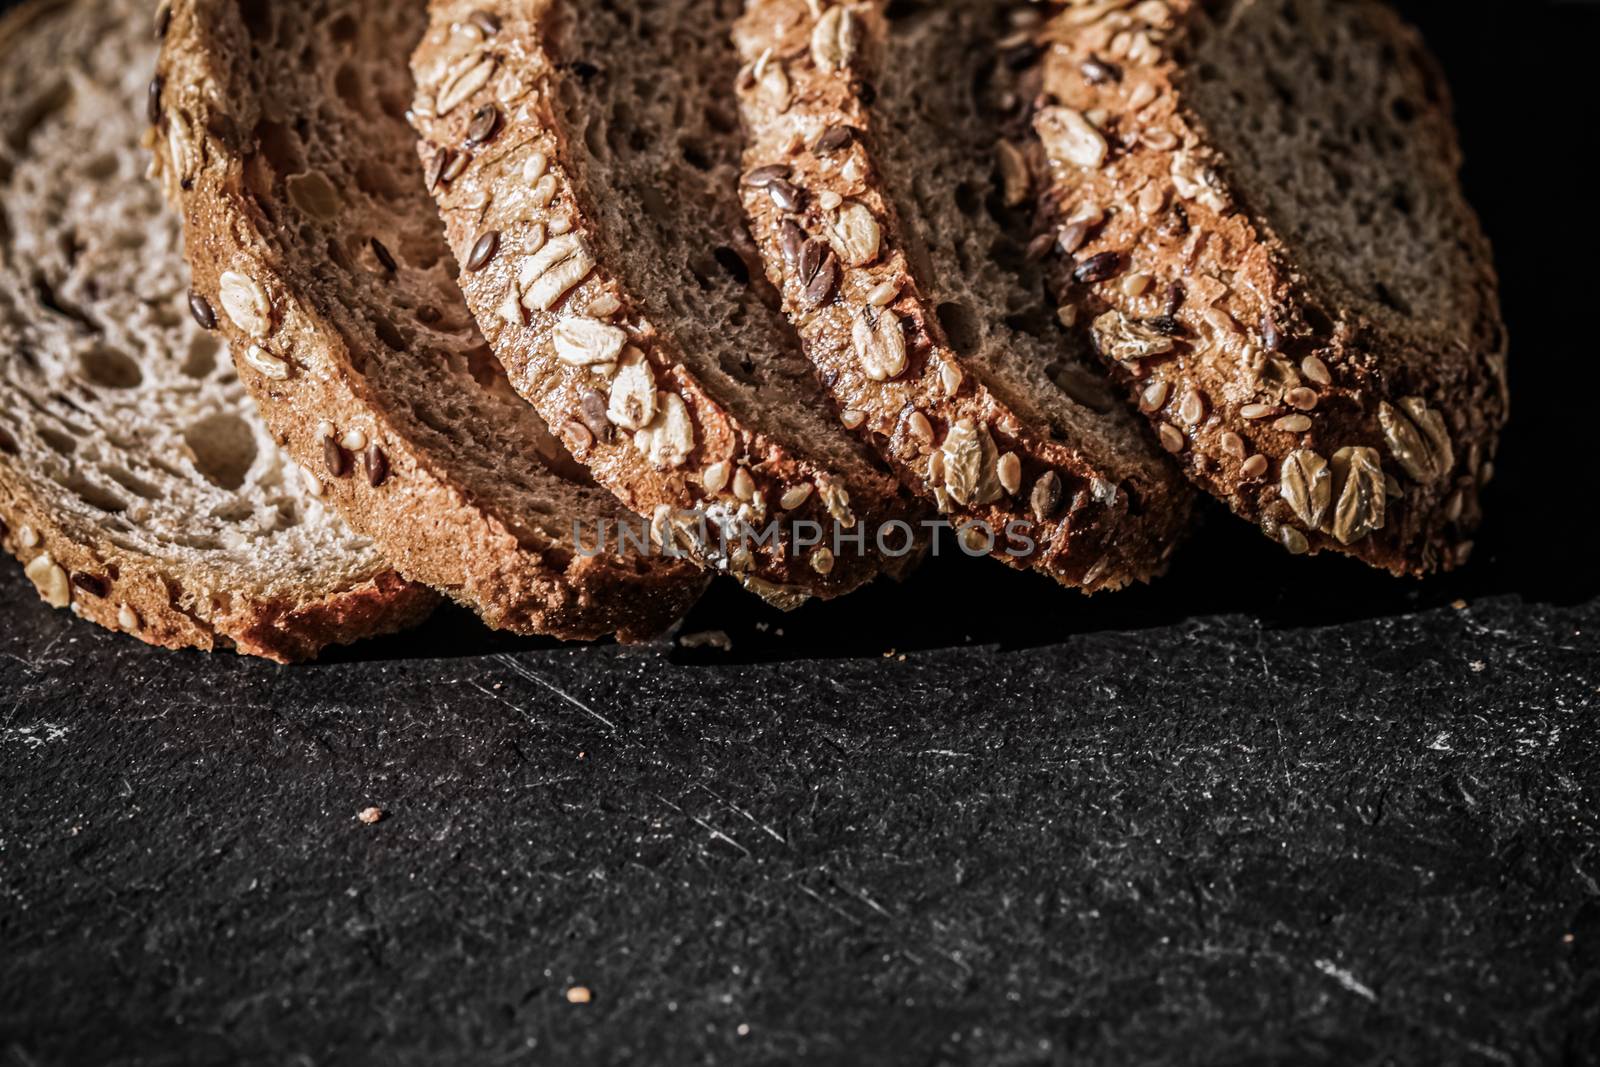 Fresh whole grain seeded bread, organic wheat flour, closeup slice texture as background for food blog or cook book recipe by Anneleven